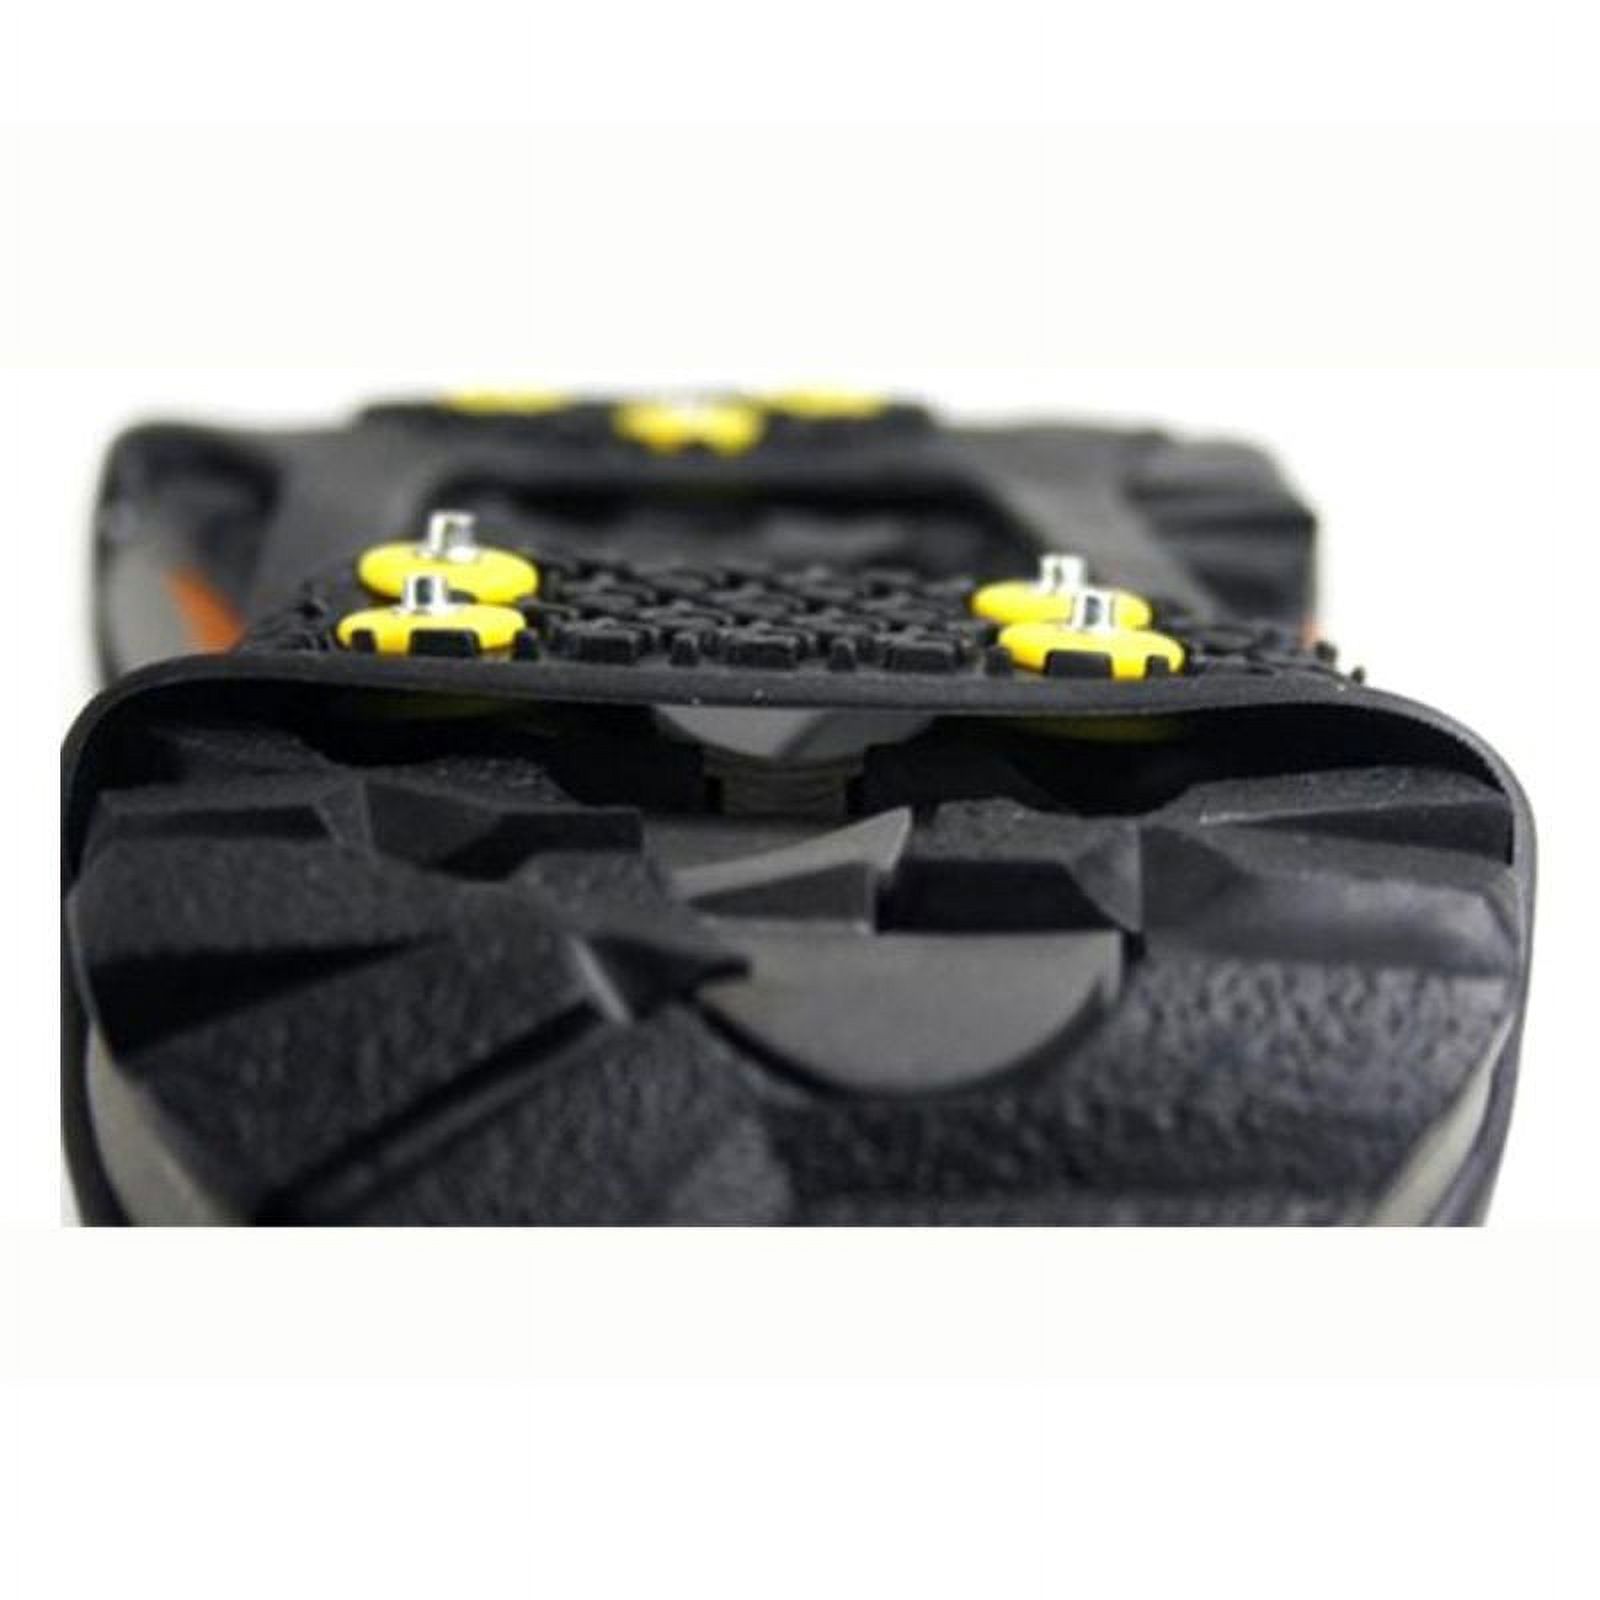 1 Pair 10 Studs Anti-Skid Snow Ice Climbing Shoe Grips Crampons Cleats Overshoes crampons spike shoes crampon - image 5 of 6